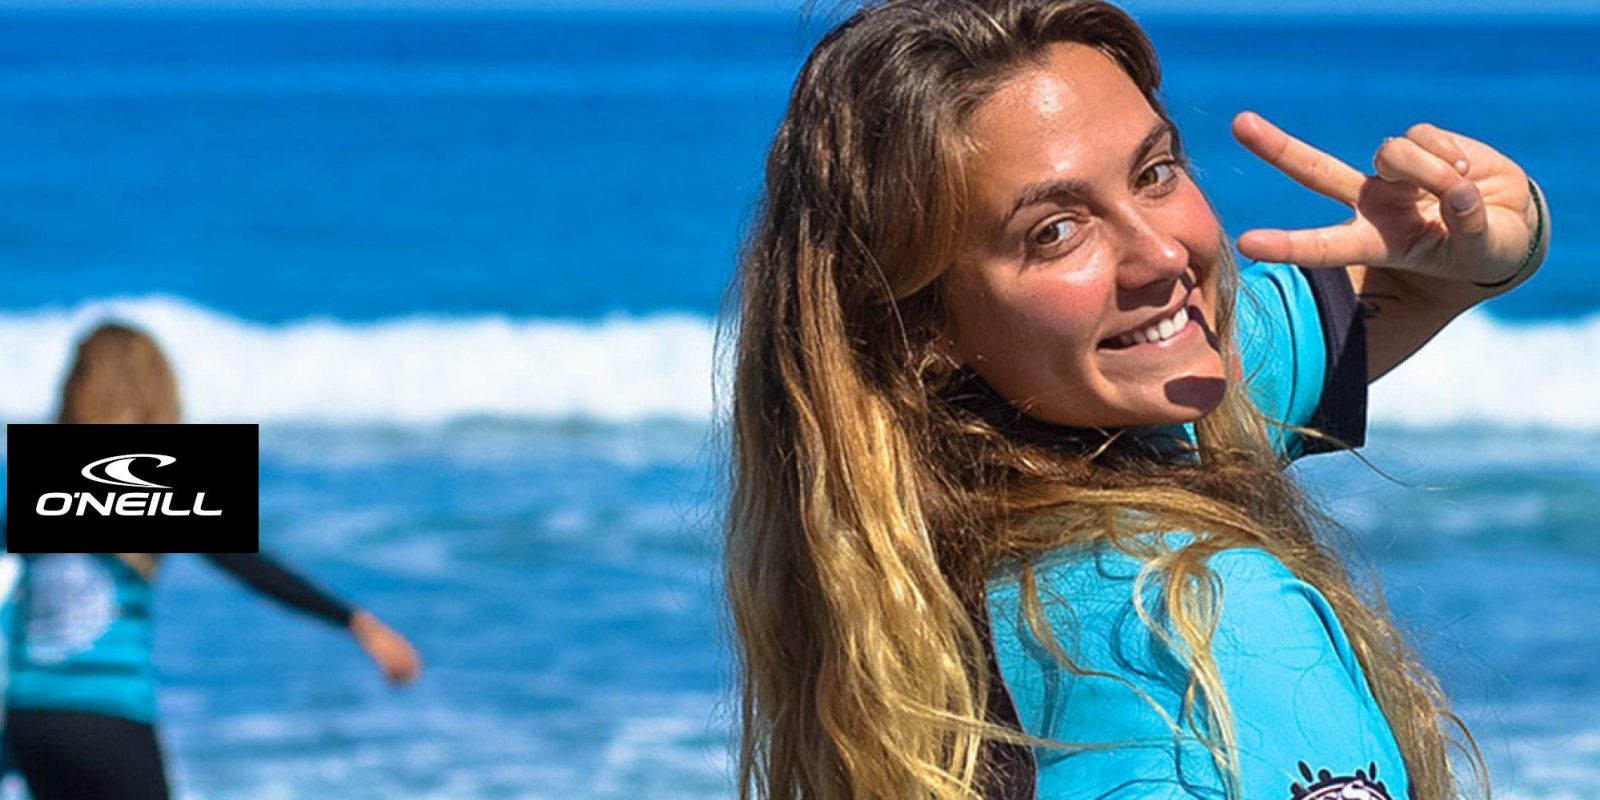 Student smiling during a surf lesson with Blackstone Surf Center in Playa las Américas in Tenerife